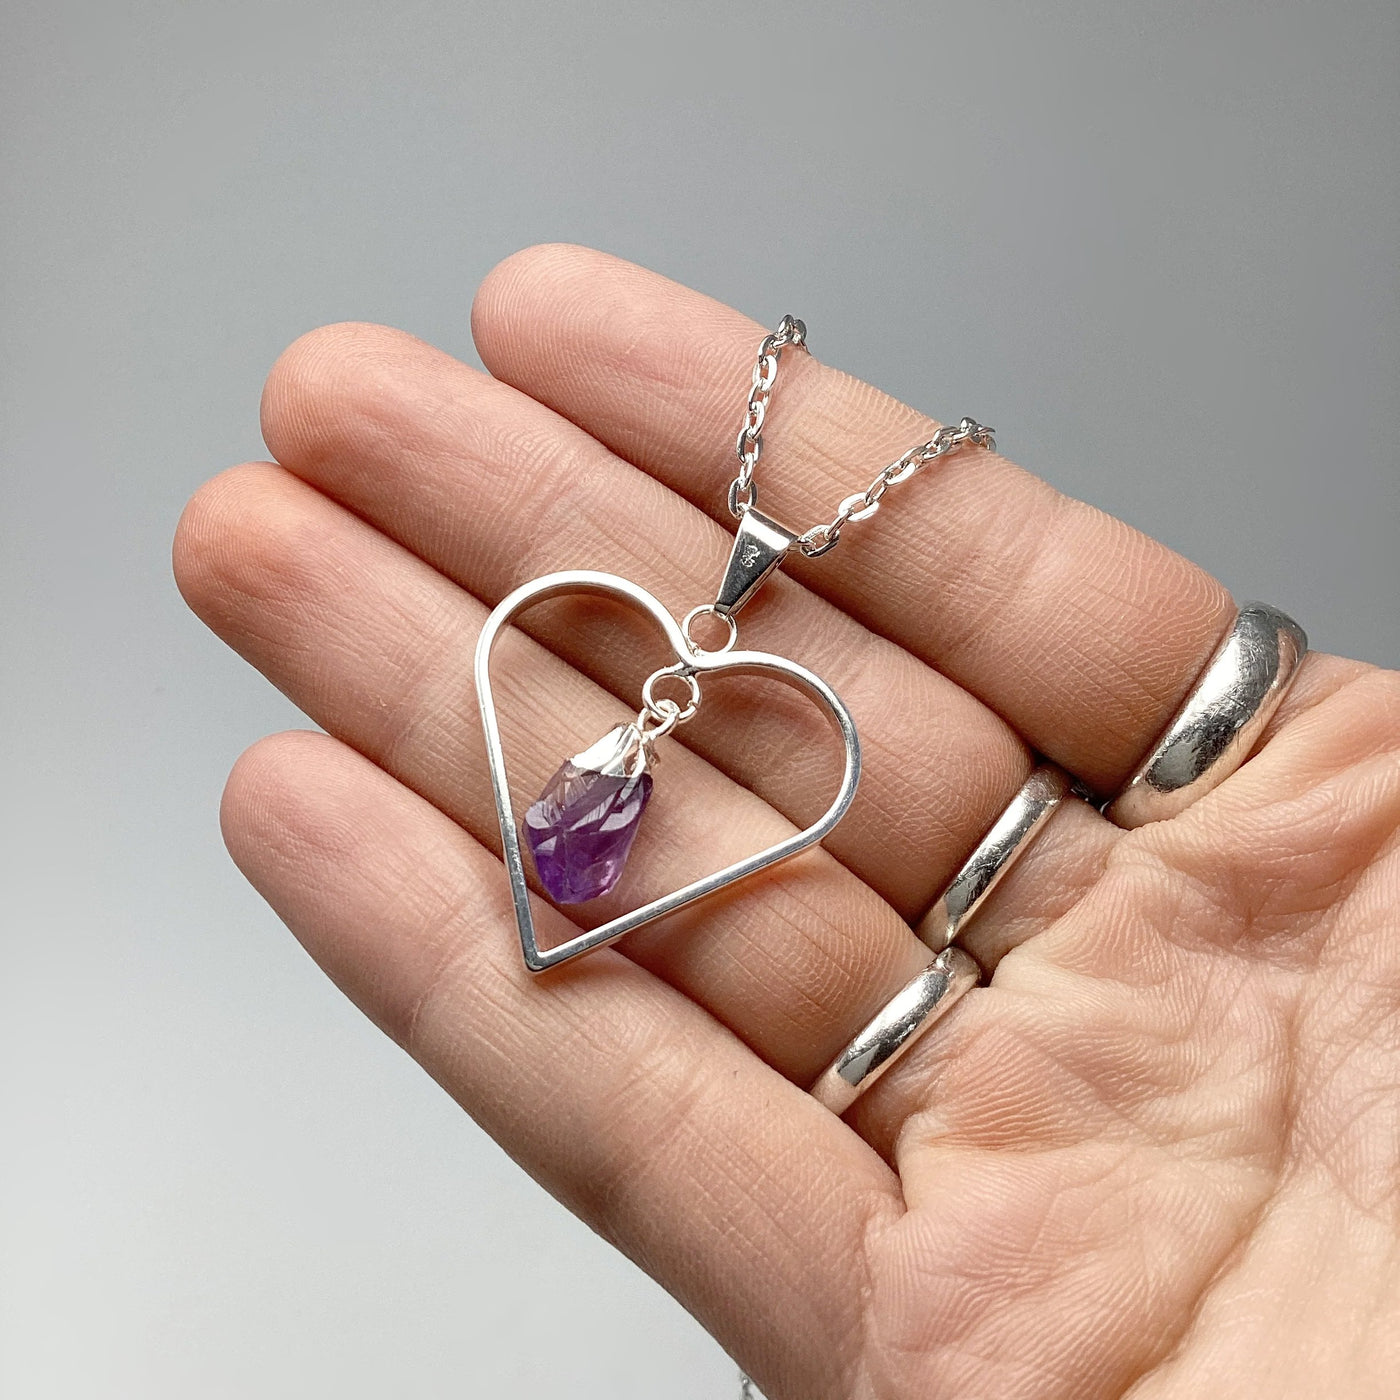 Heart Necklace with Amethyst